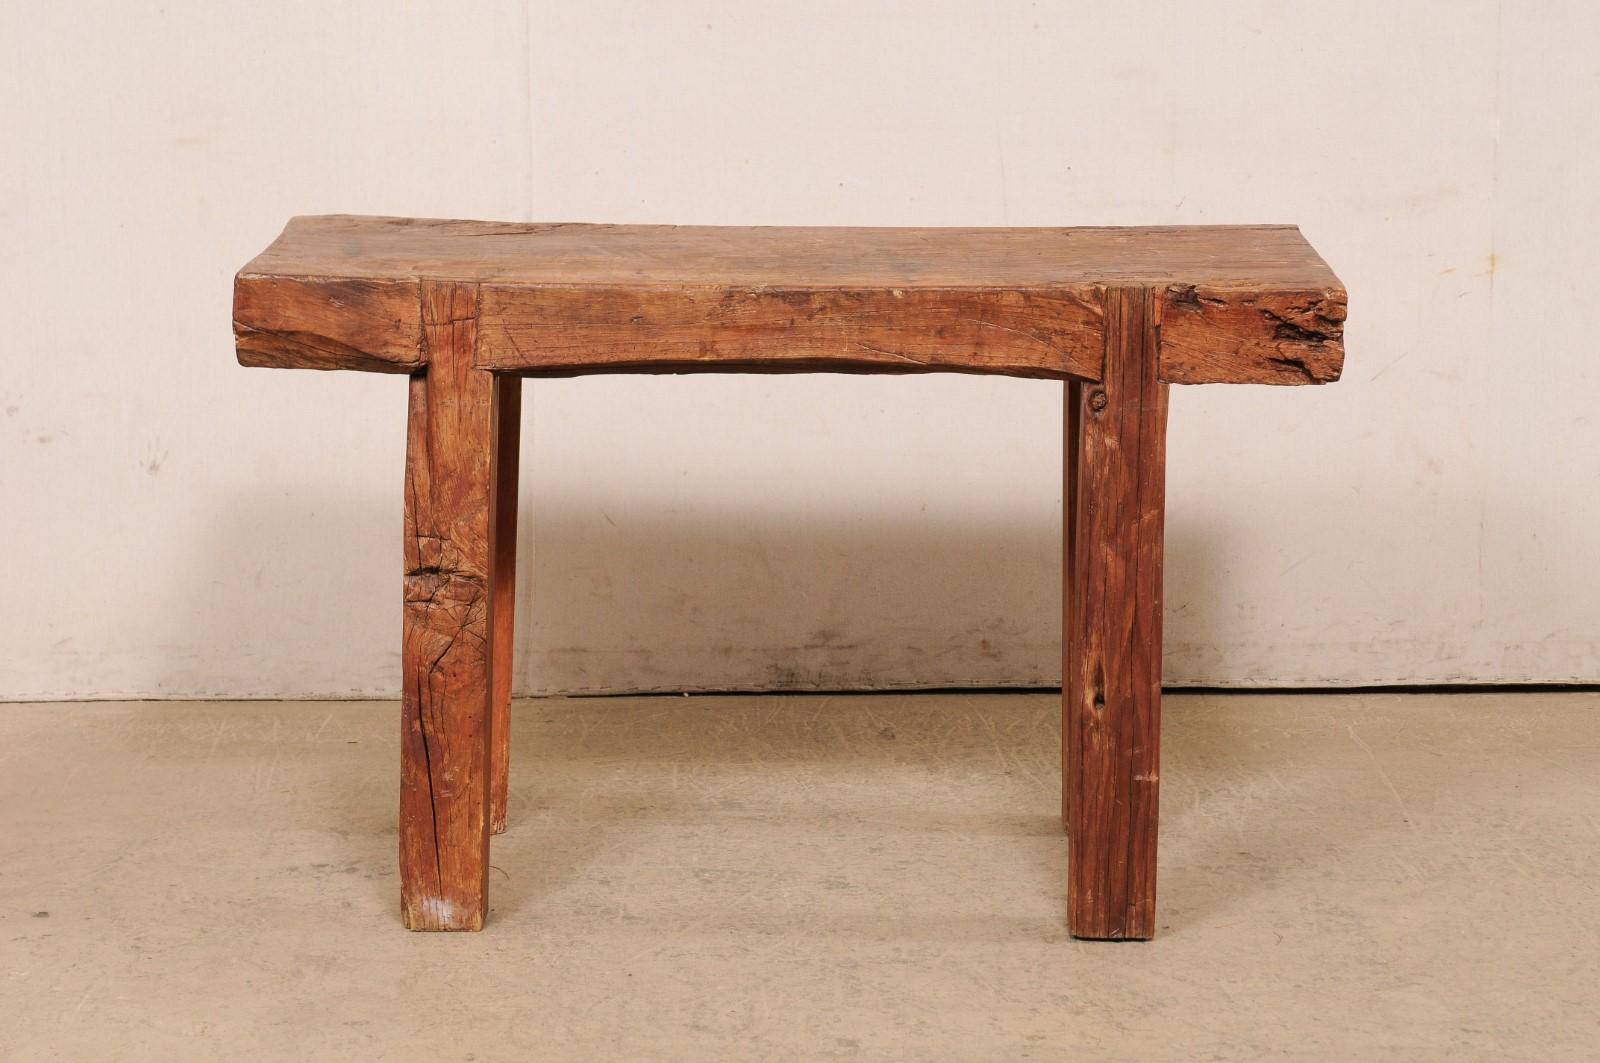 Beautifully Rustic Thick Chopping Block Top Table Would Be a Great Sink Base 4